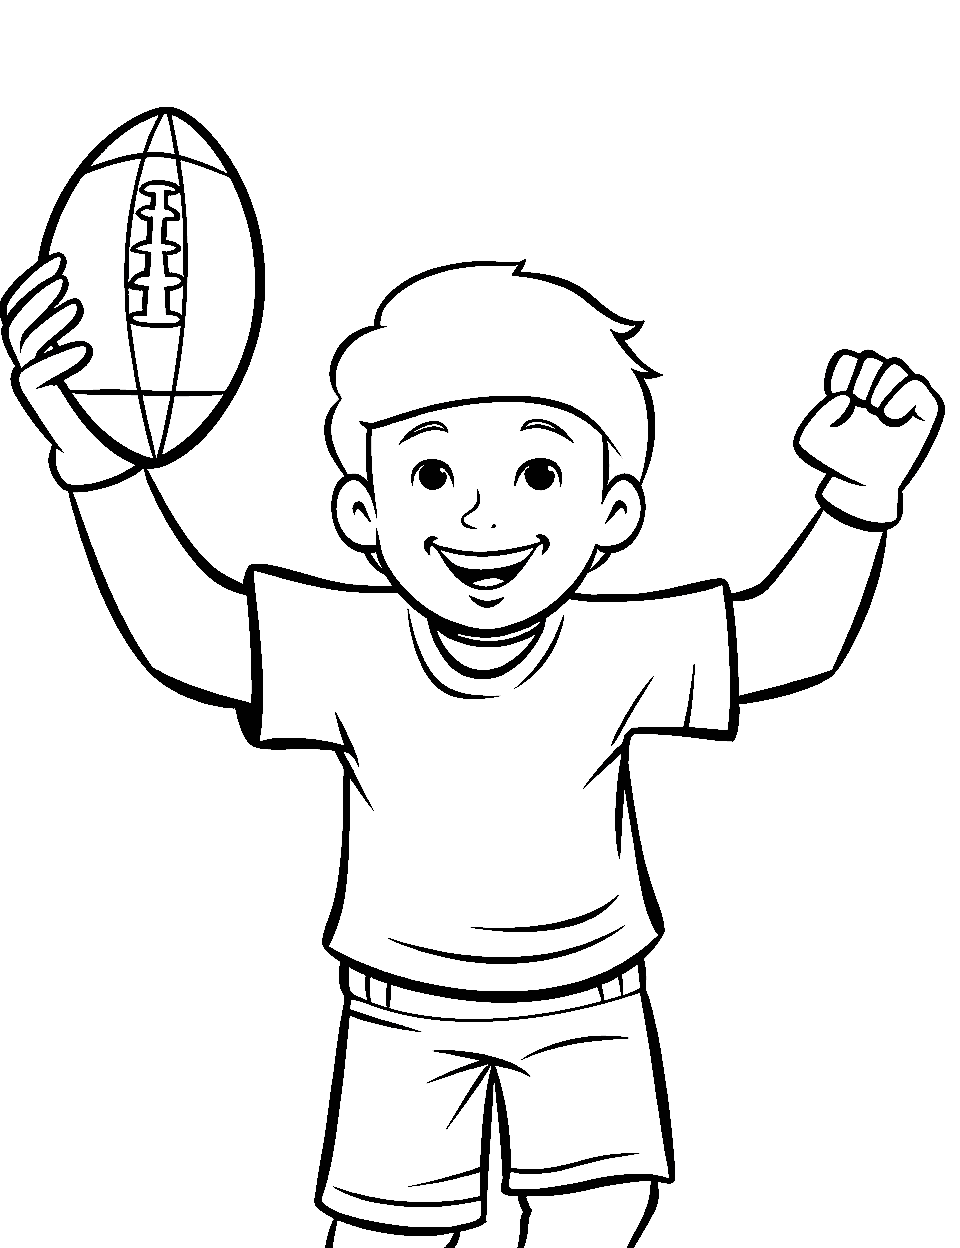 Avid Football Fan Coloring Page - A fan holding a football and posing for a picture.